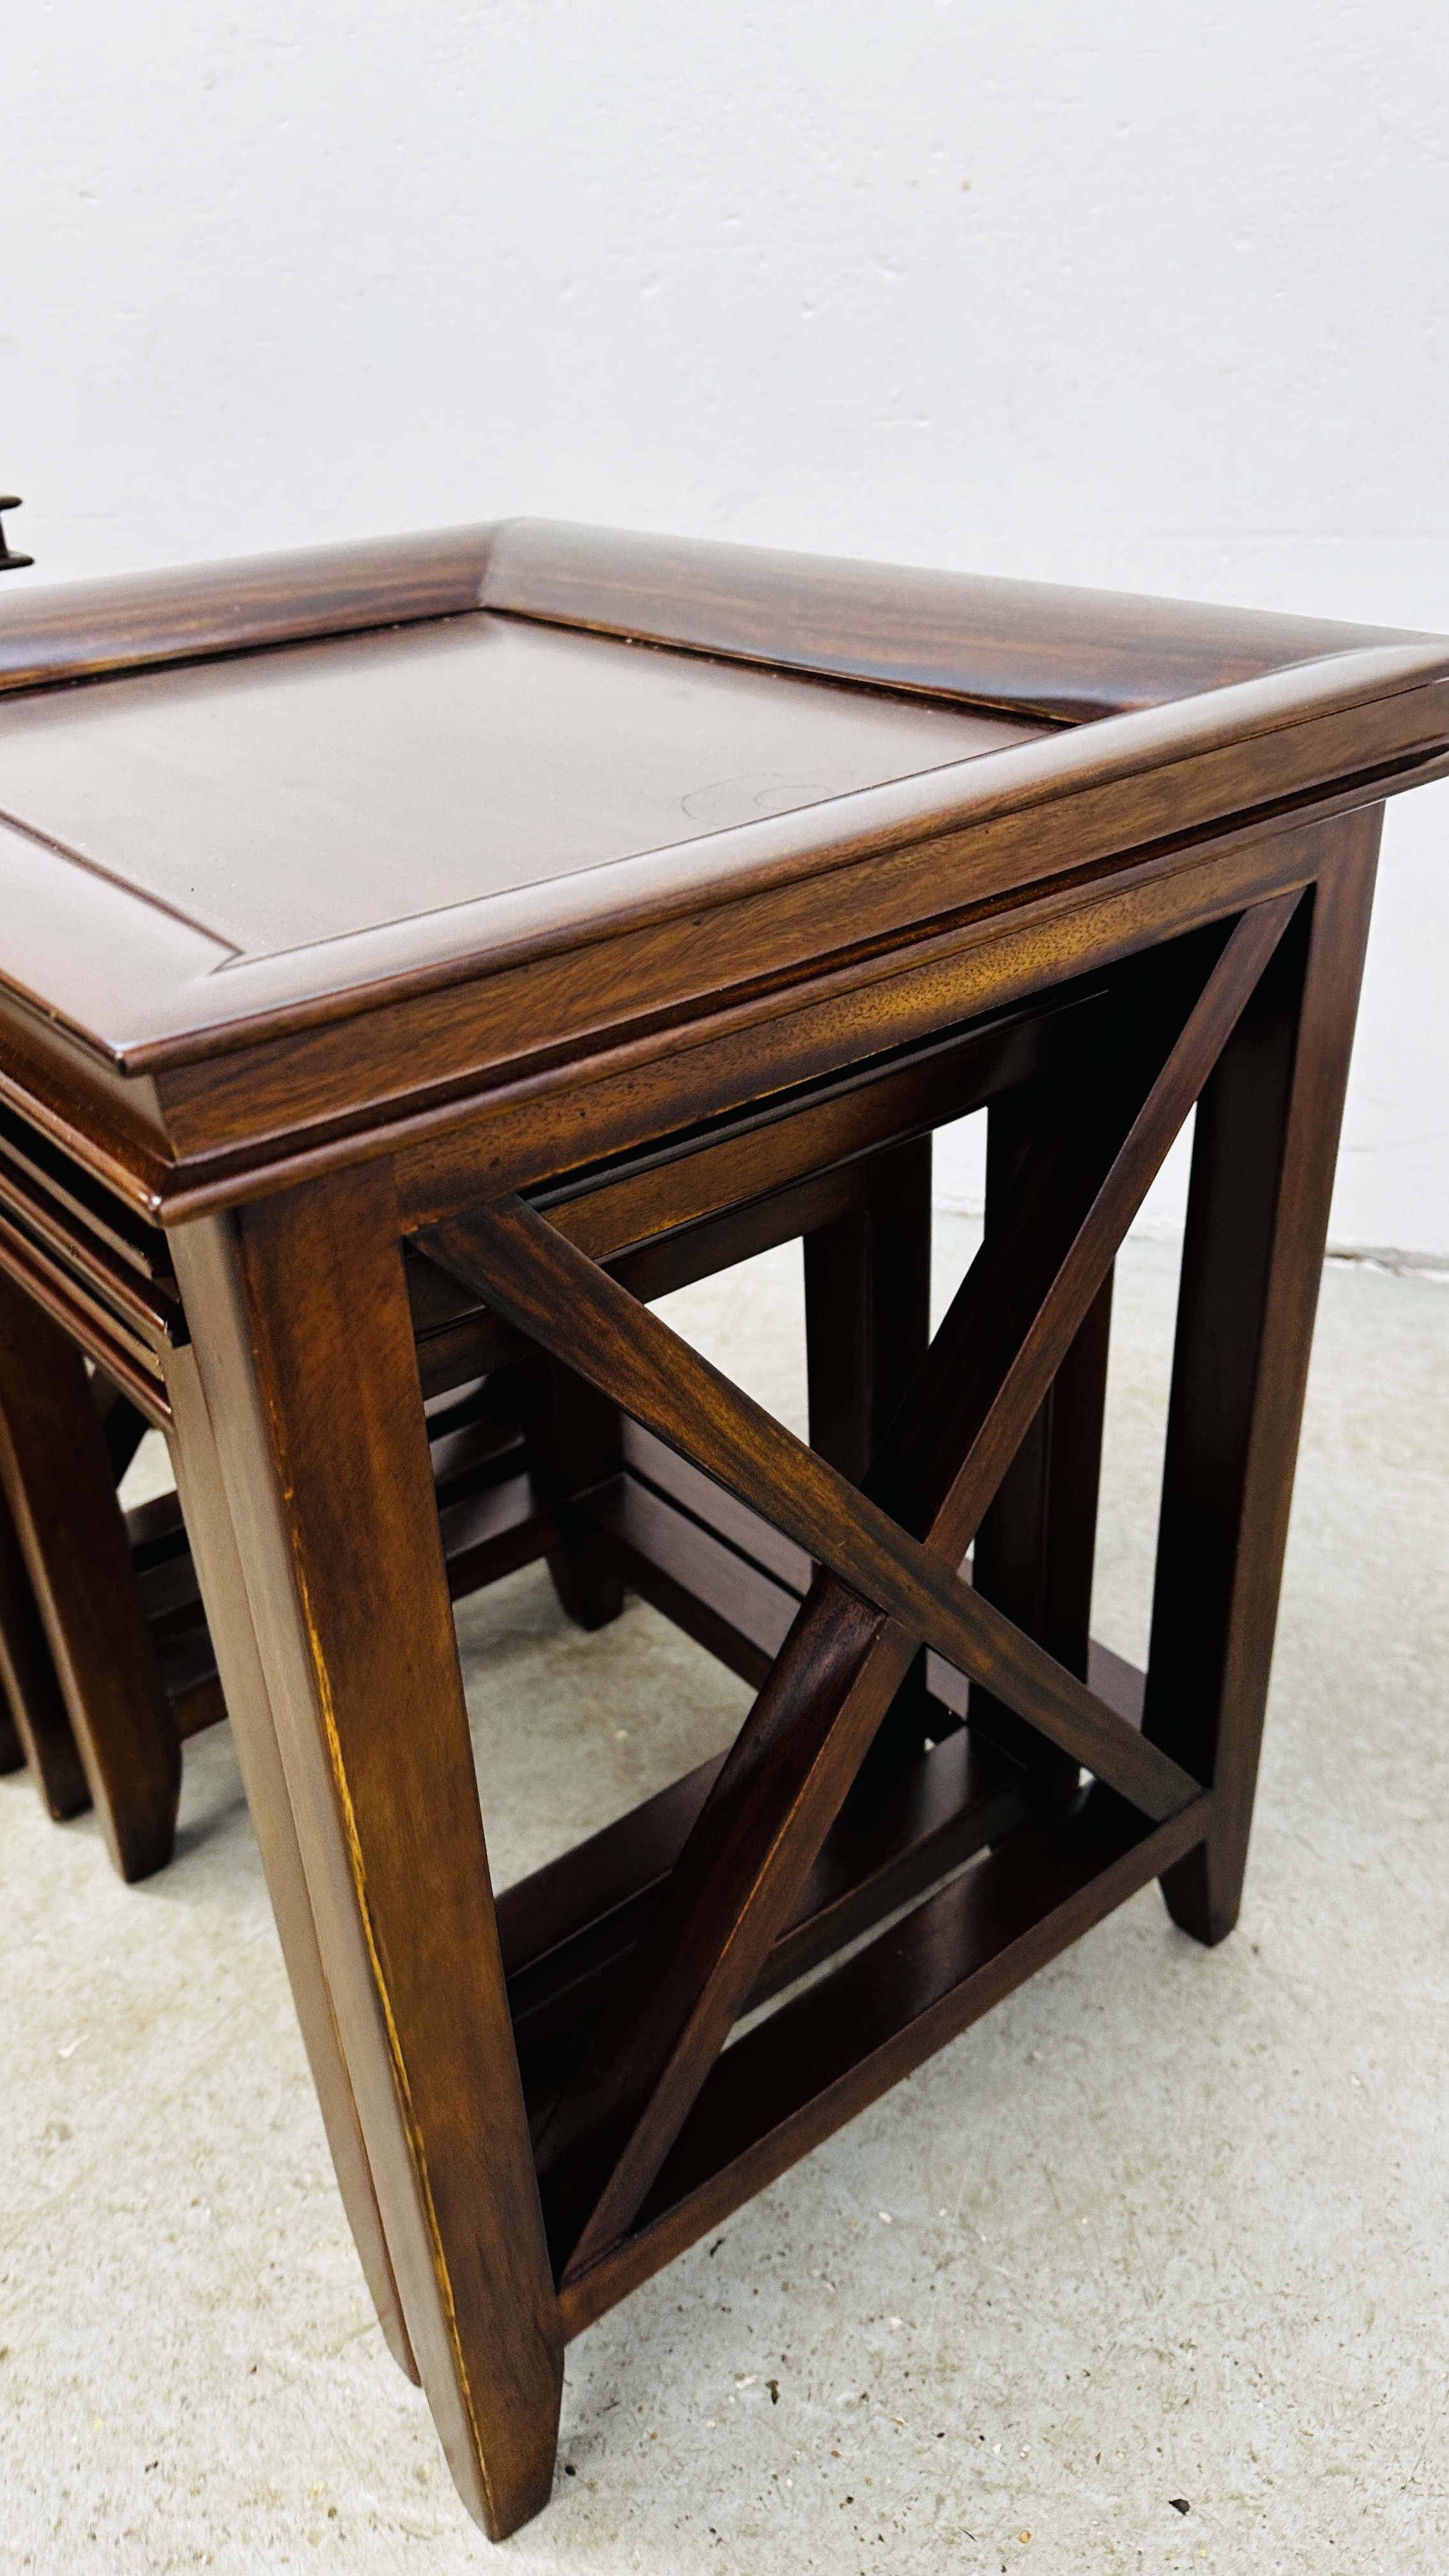 A NEST OF 3 HARDWOOD OCCASIONAL TABLES ALONG WITH A MATCHING SINGLE DRAWER LAMP TABLE W 46 X 46 X - Image 13 of 16